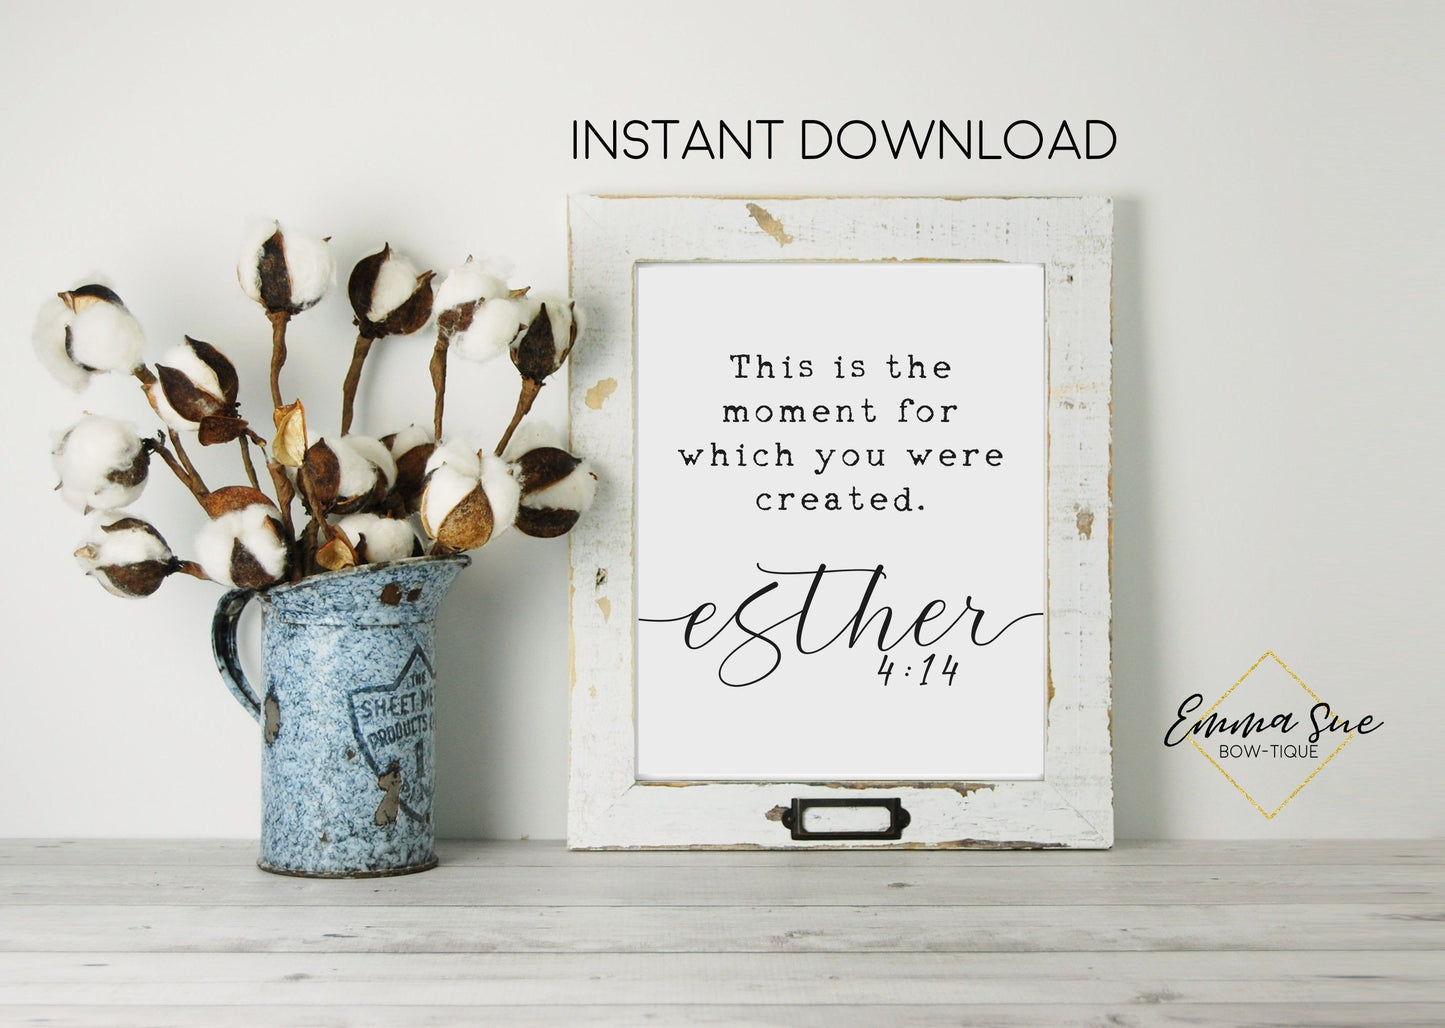 This is the moment for which you were created Esther 4:14 Bible Scripture Wall Art Printable Sign